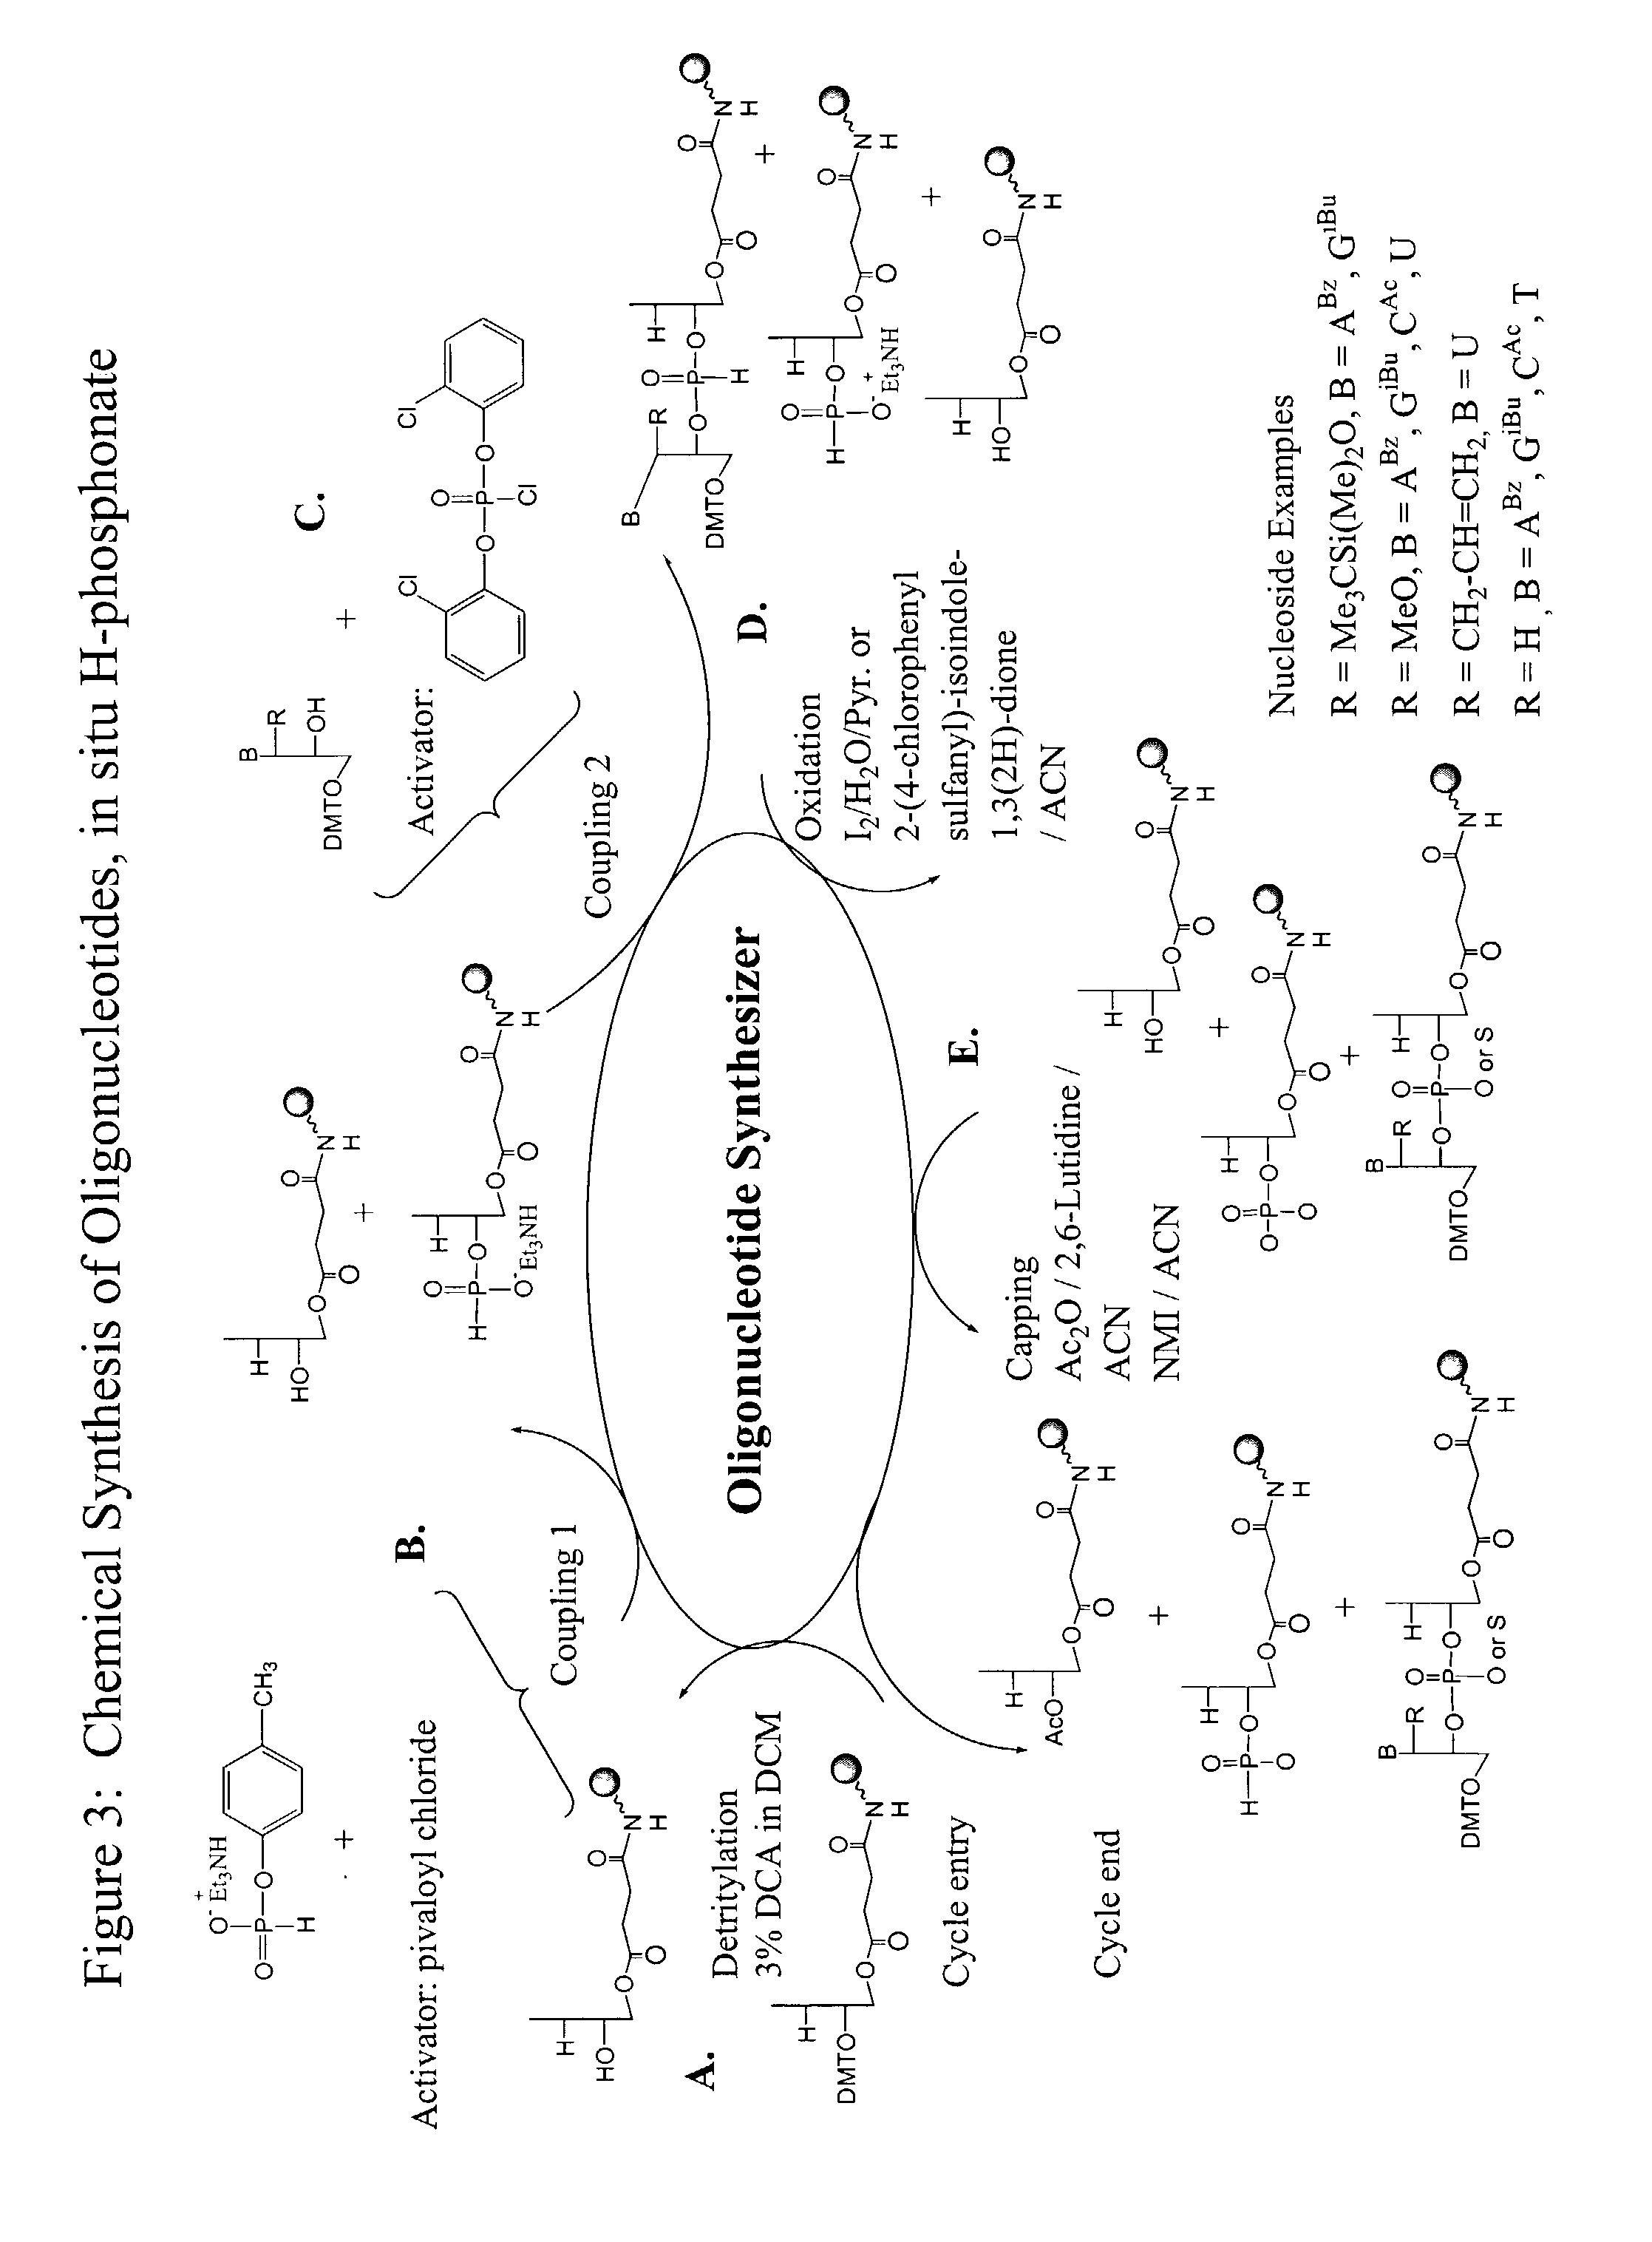 Methods and reagents for oligonucleotide synthesis